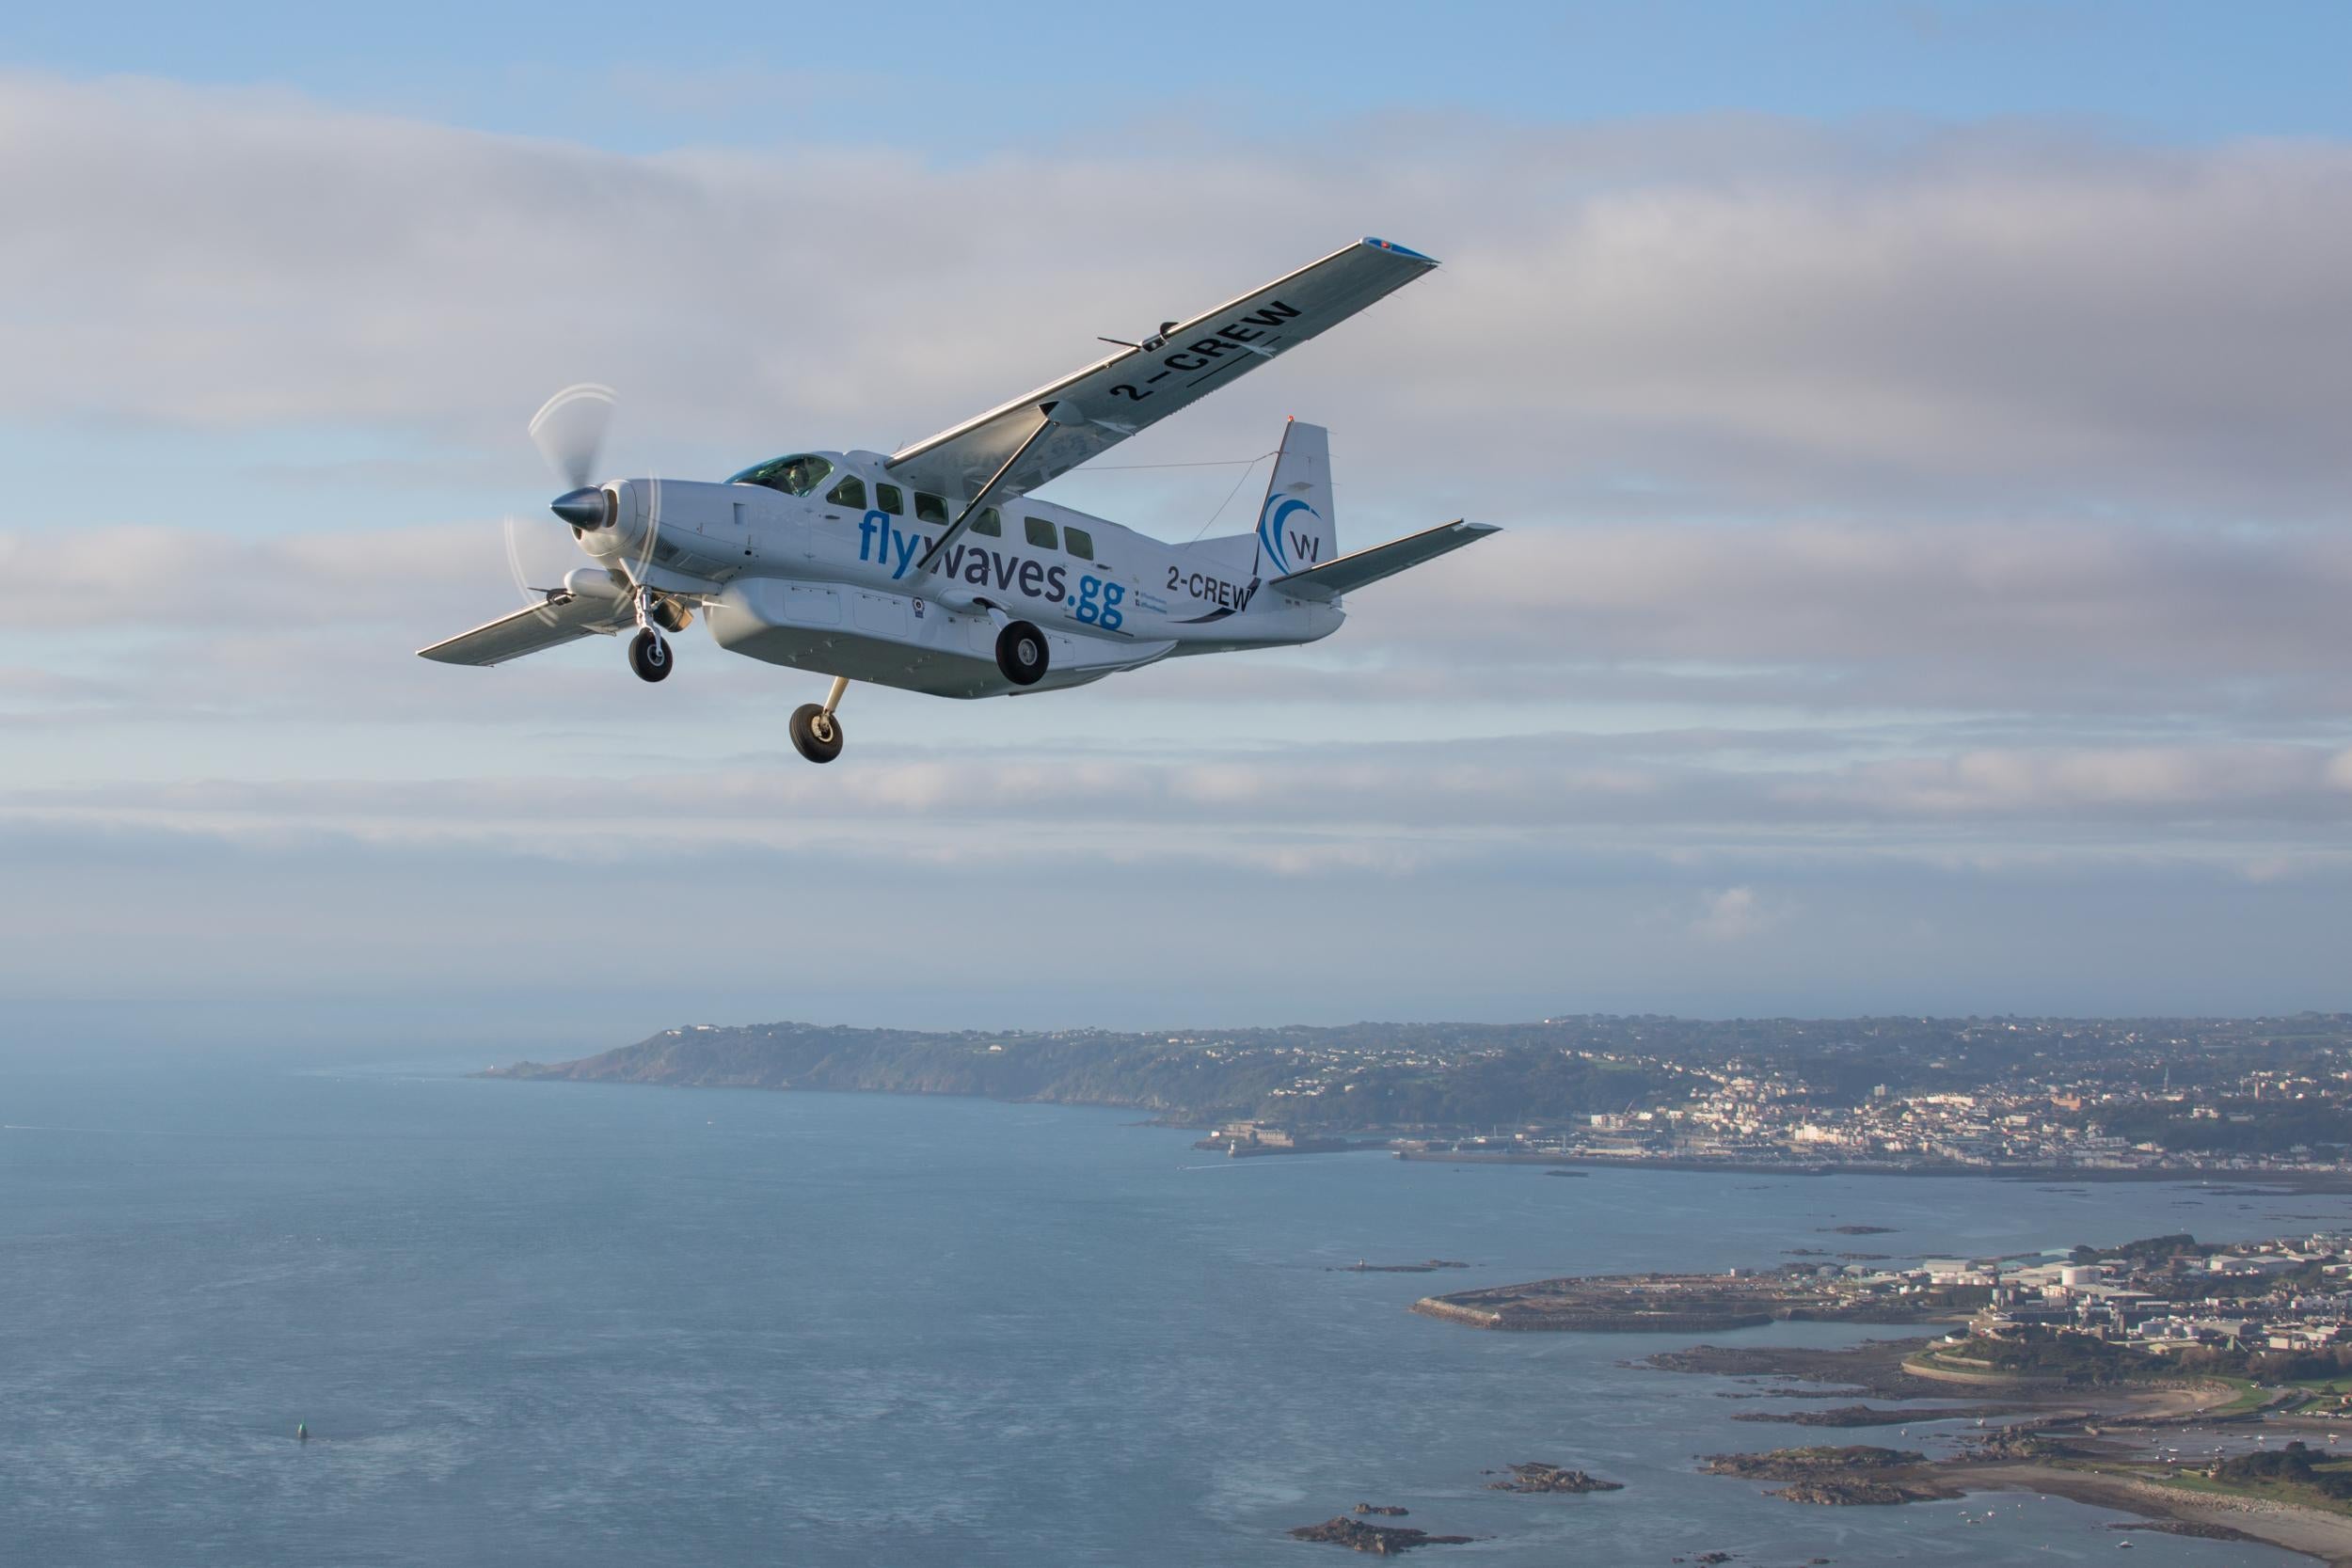 Waves is connecting the Channel Islands with uber-like air-taxi service